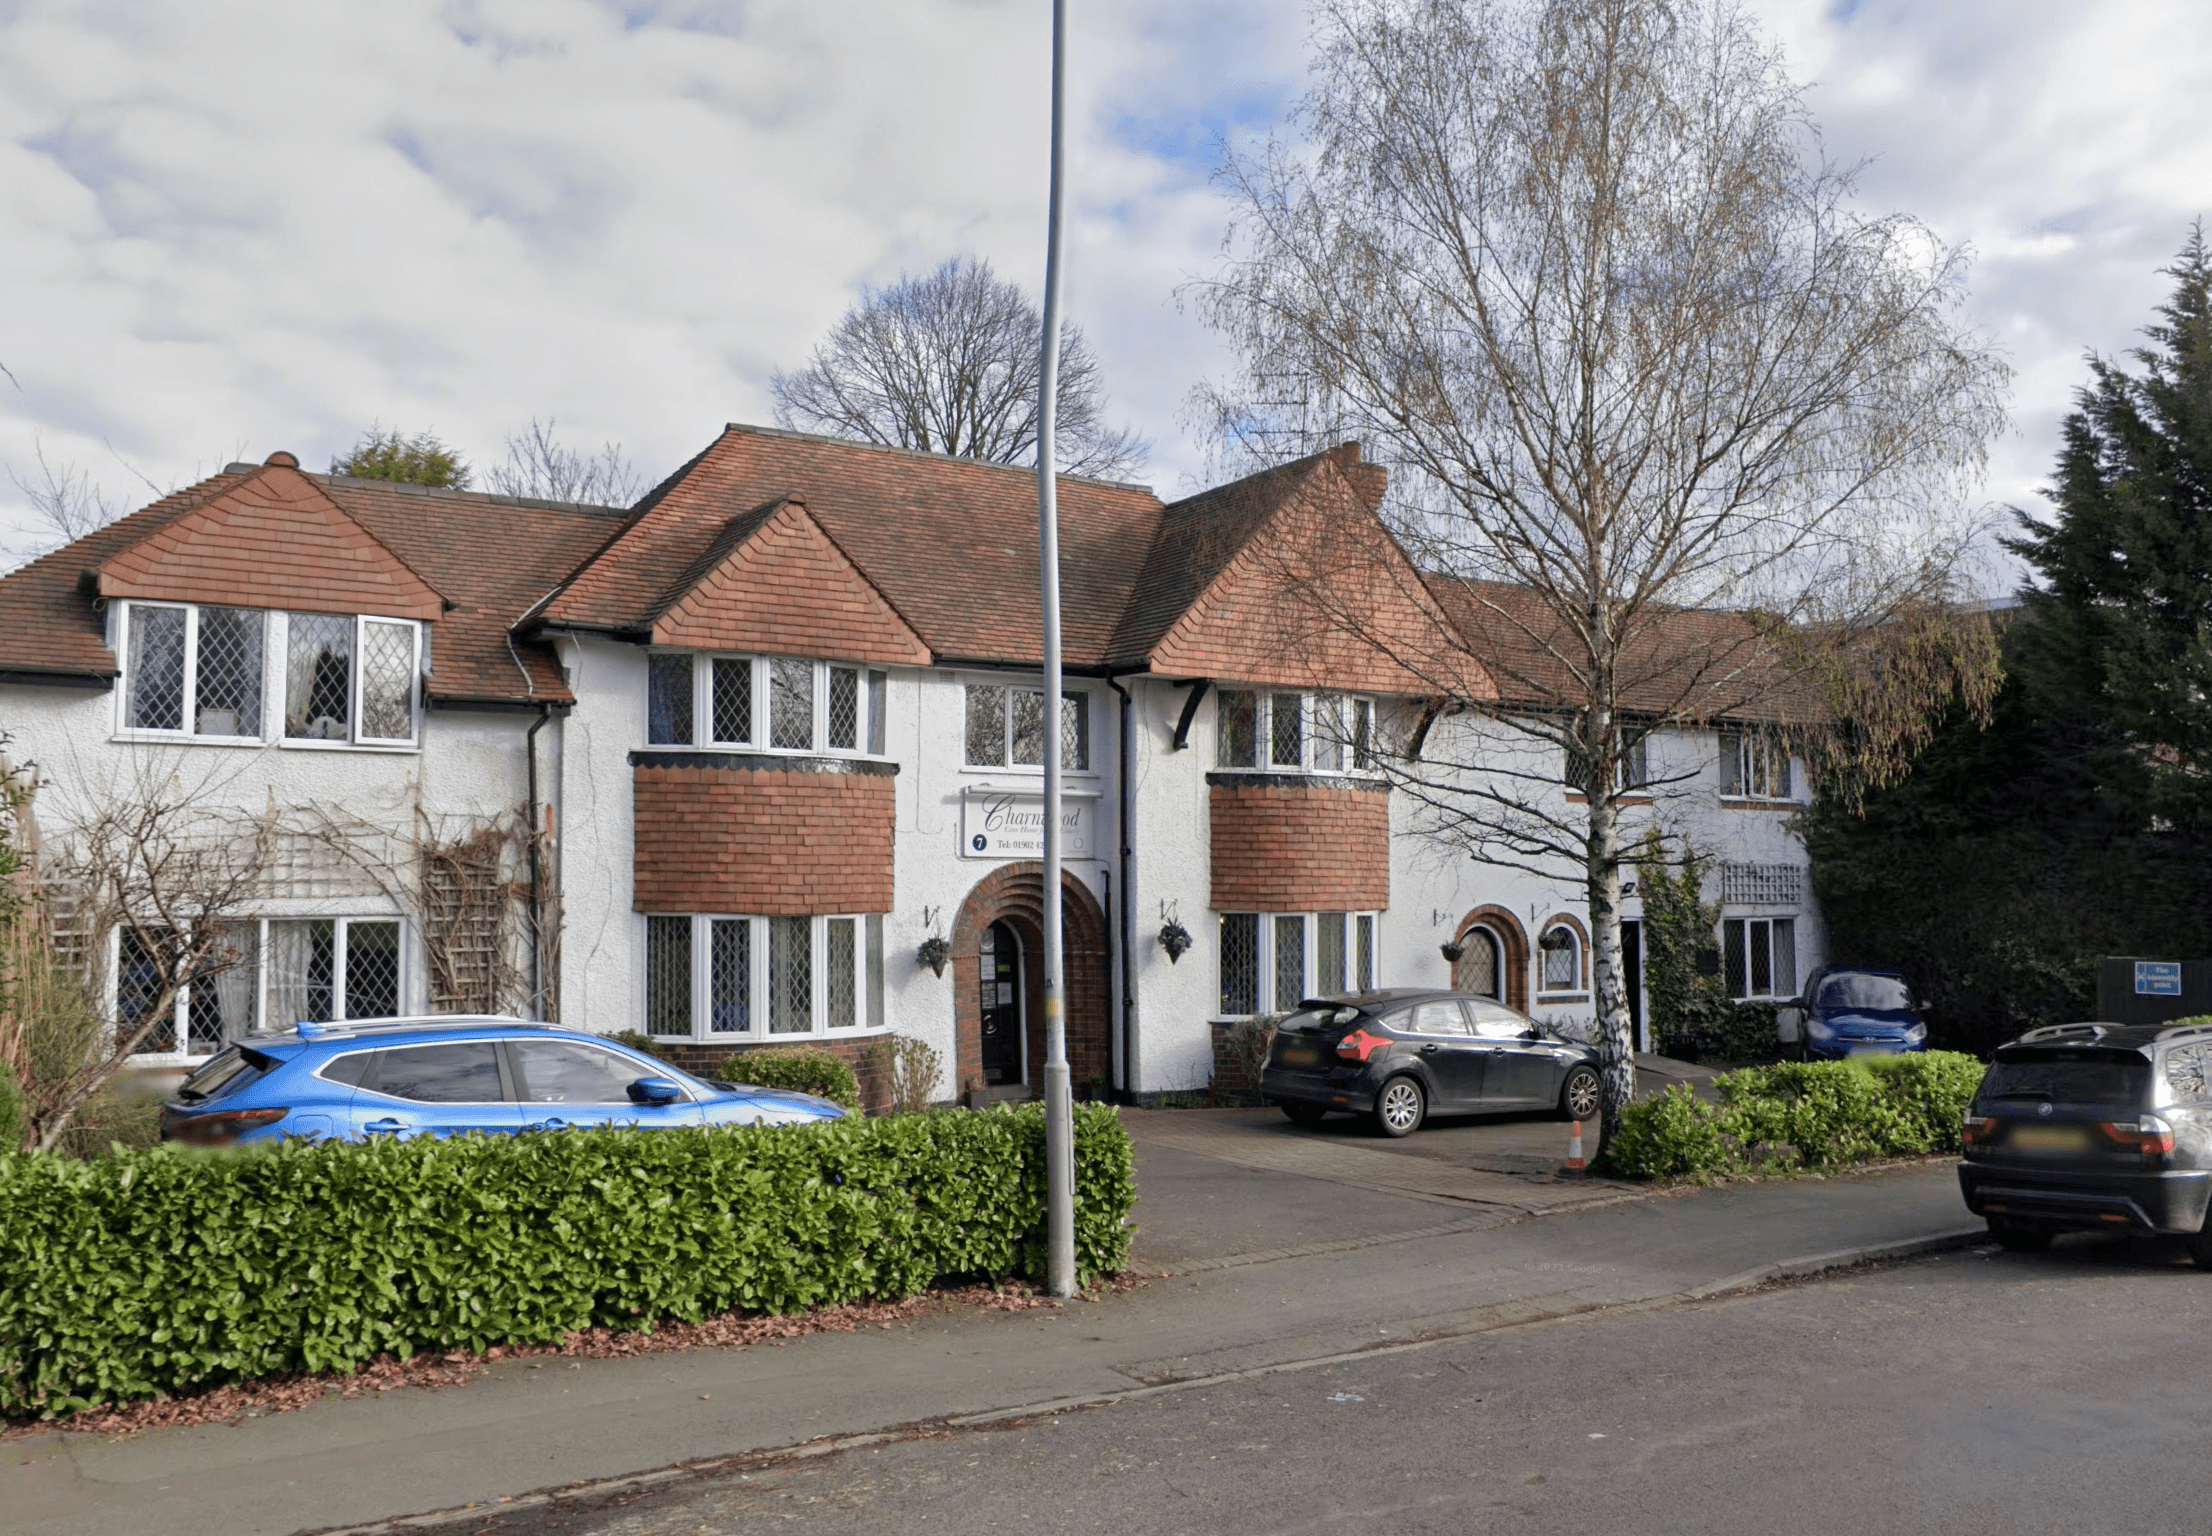 Exterior of Charwood care home in Finchfield, Wolverhampton